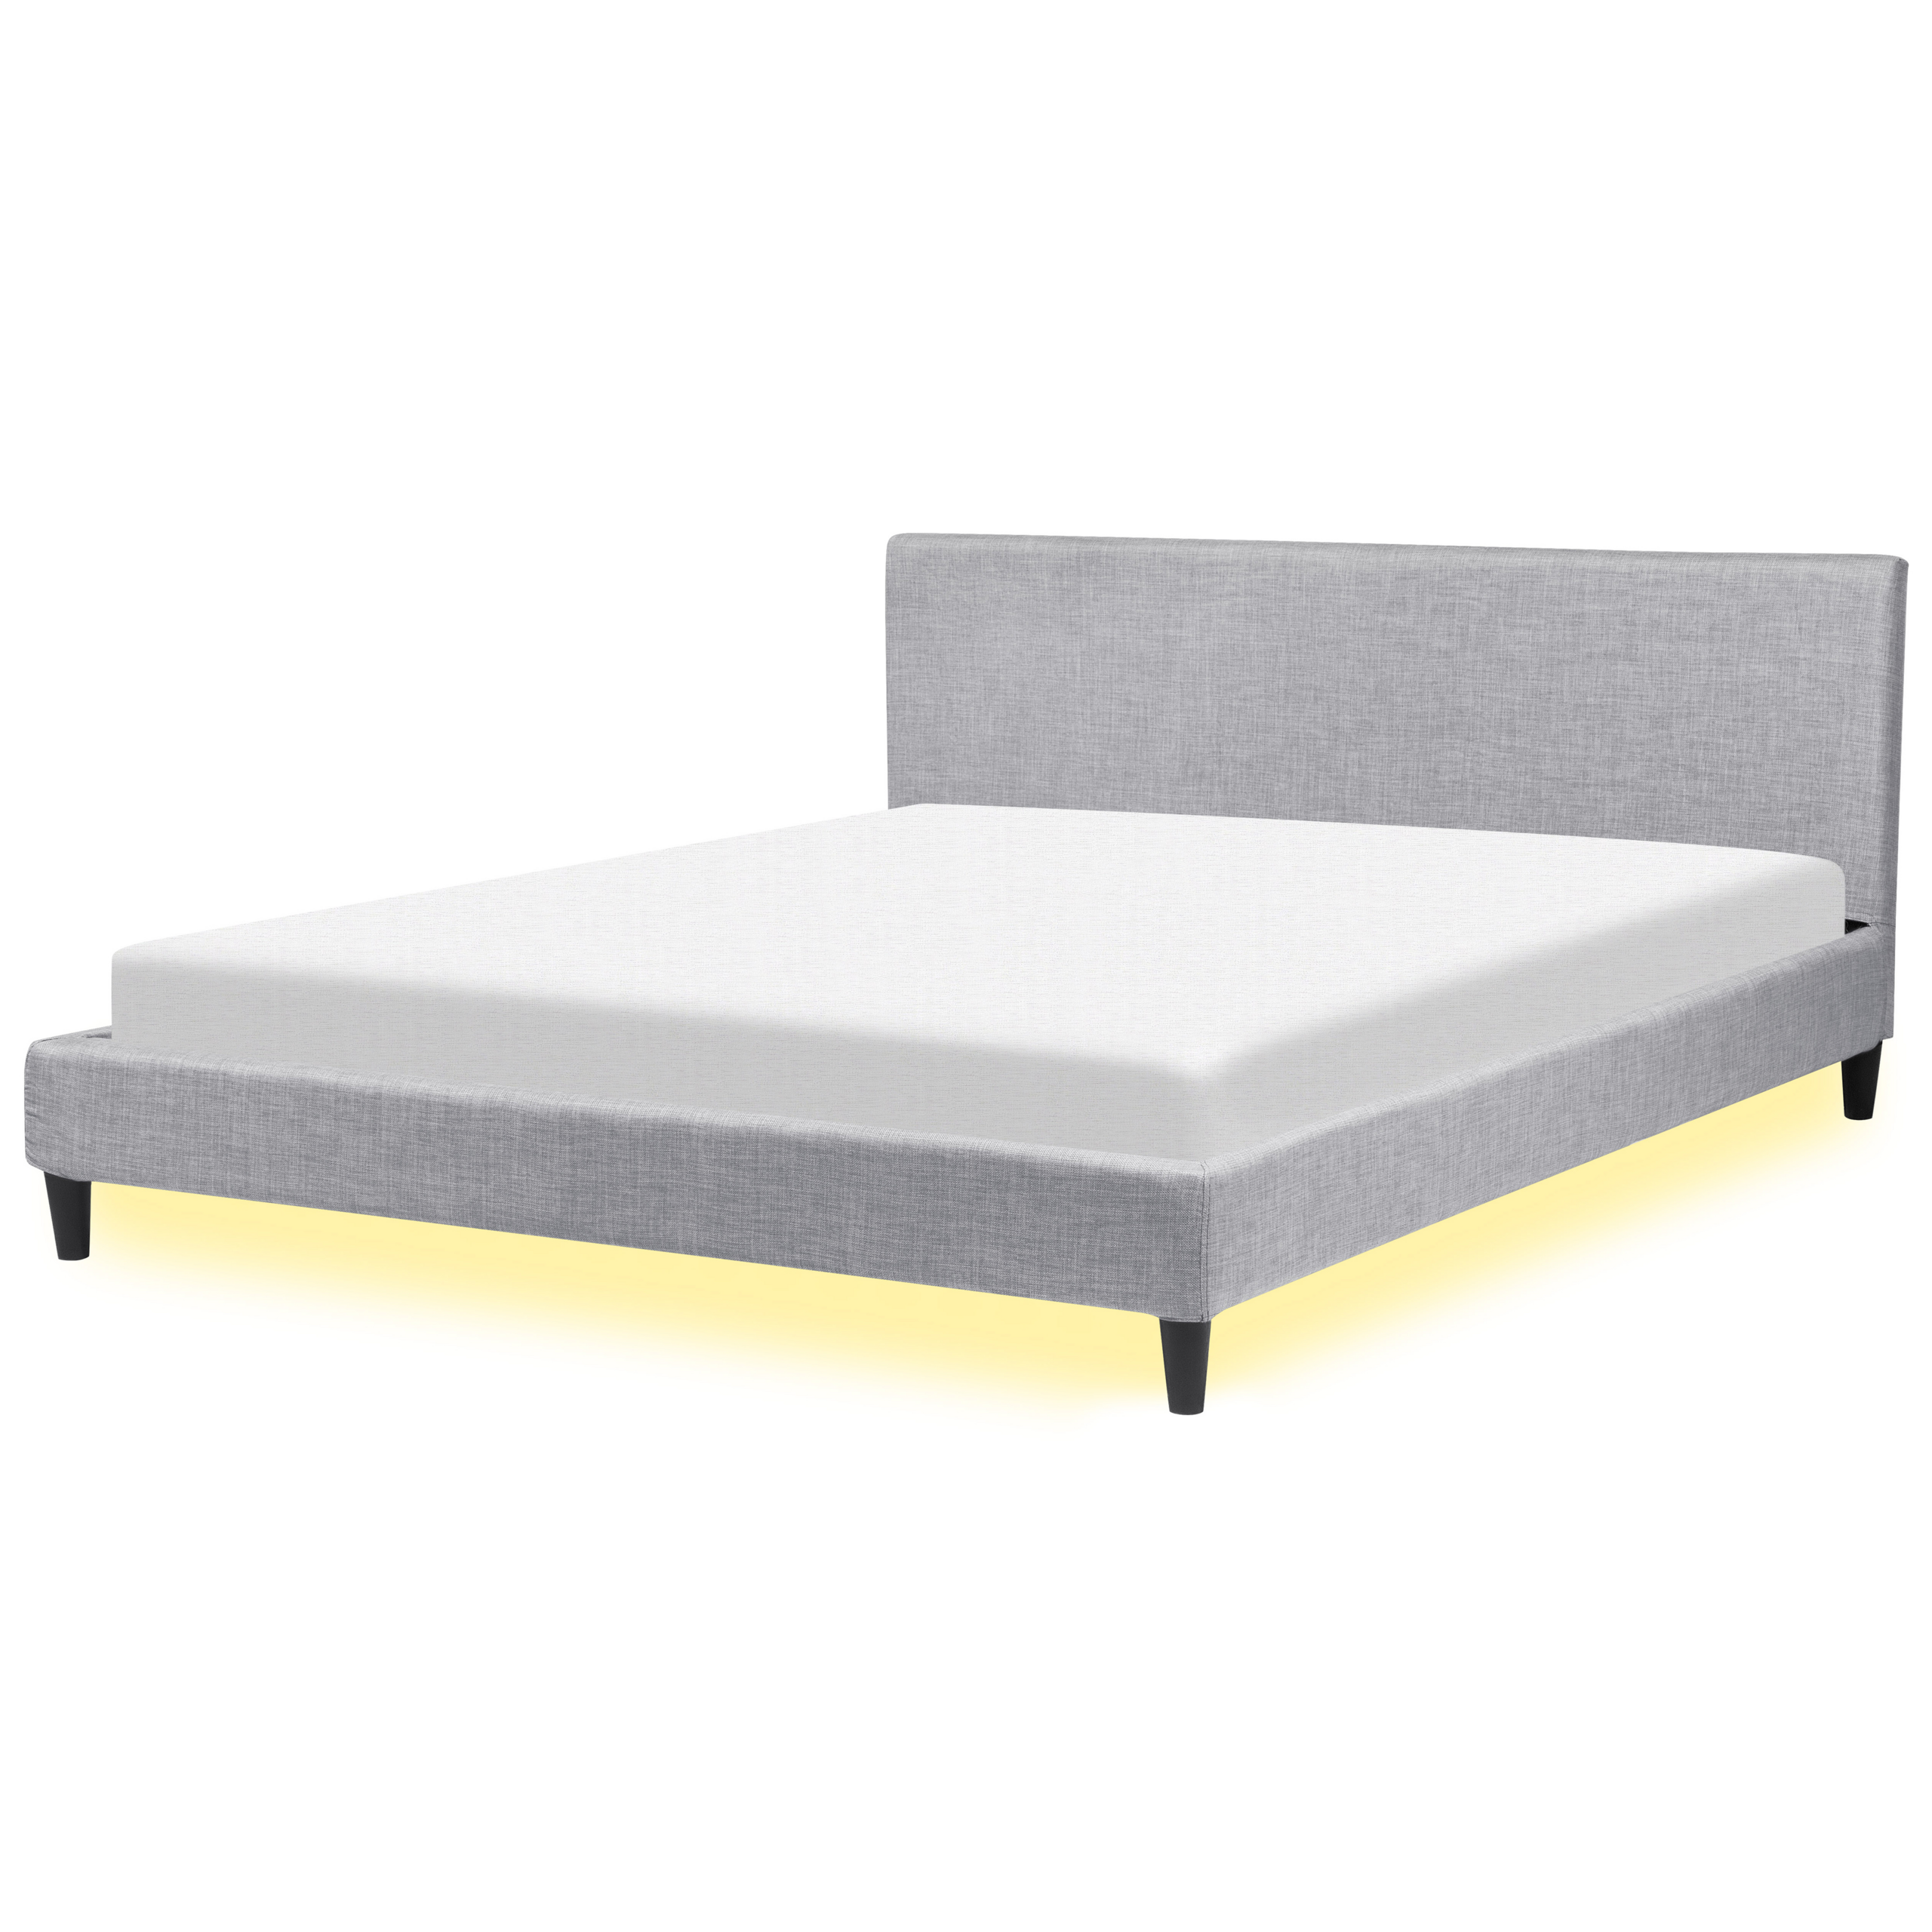 Beliani EU Super King Size Panel Bed 6ft Grey Fabric Slatted Frame with White LED Contemporary